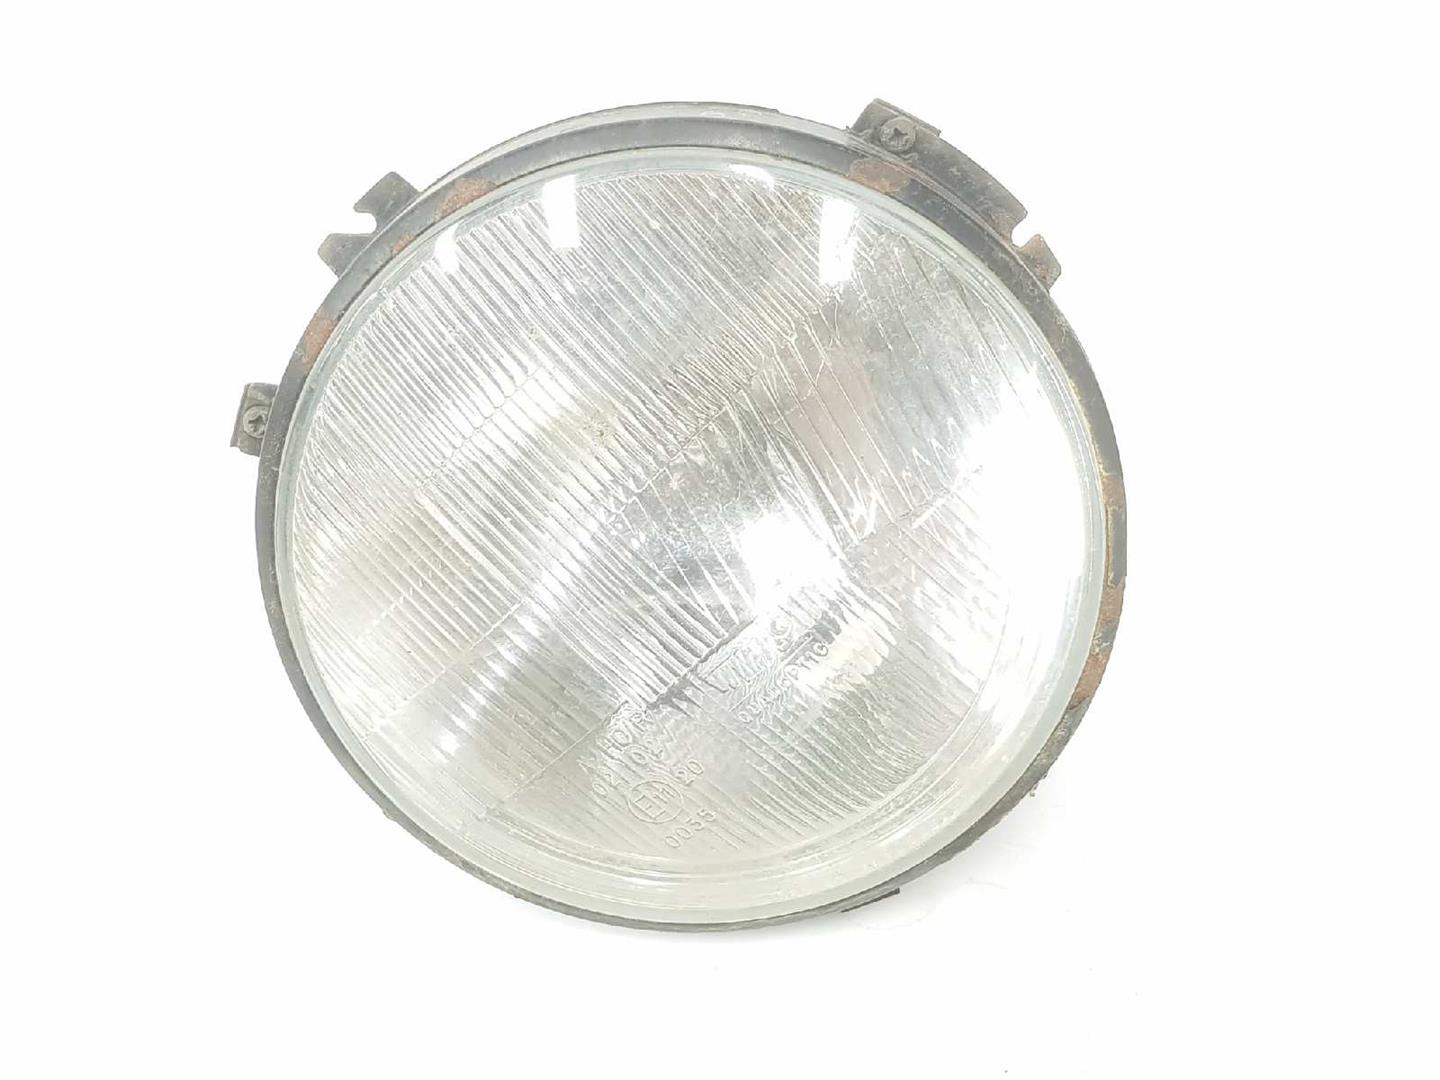 LAND ROVER Defender 1 generation (1983-2016) Front Left Headlight STC1210, STC1210 24114938